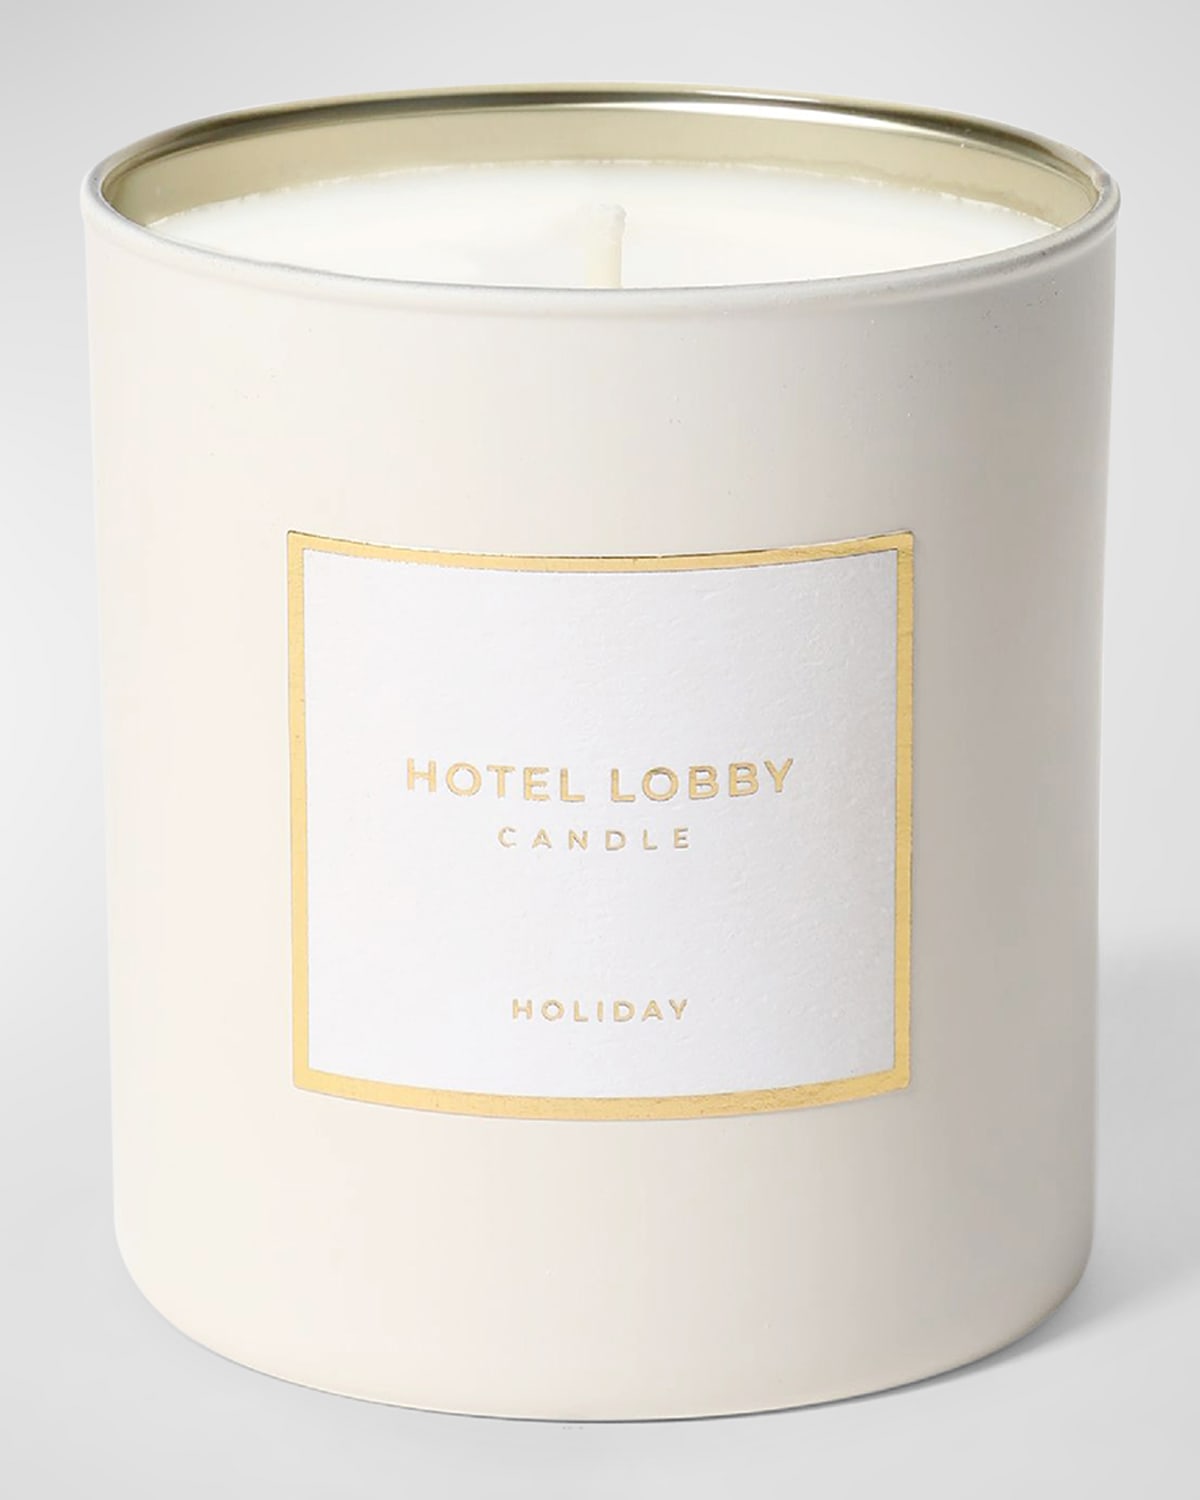 Hotel Lobby Candle 9.75 Oz. Holiday Candle